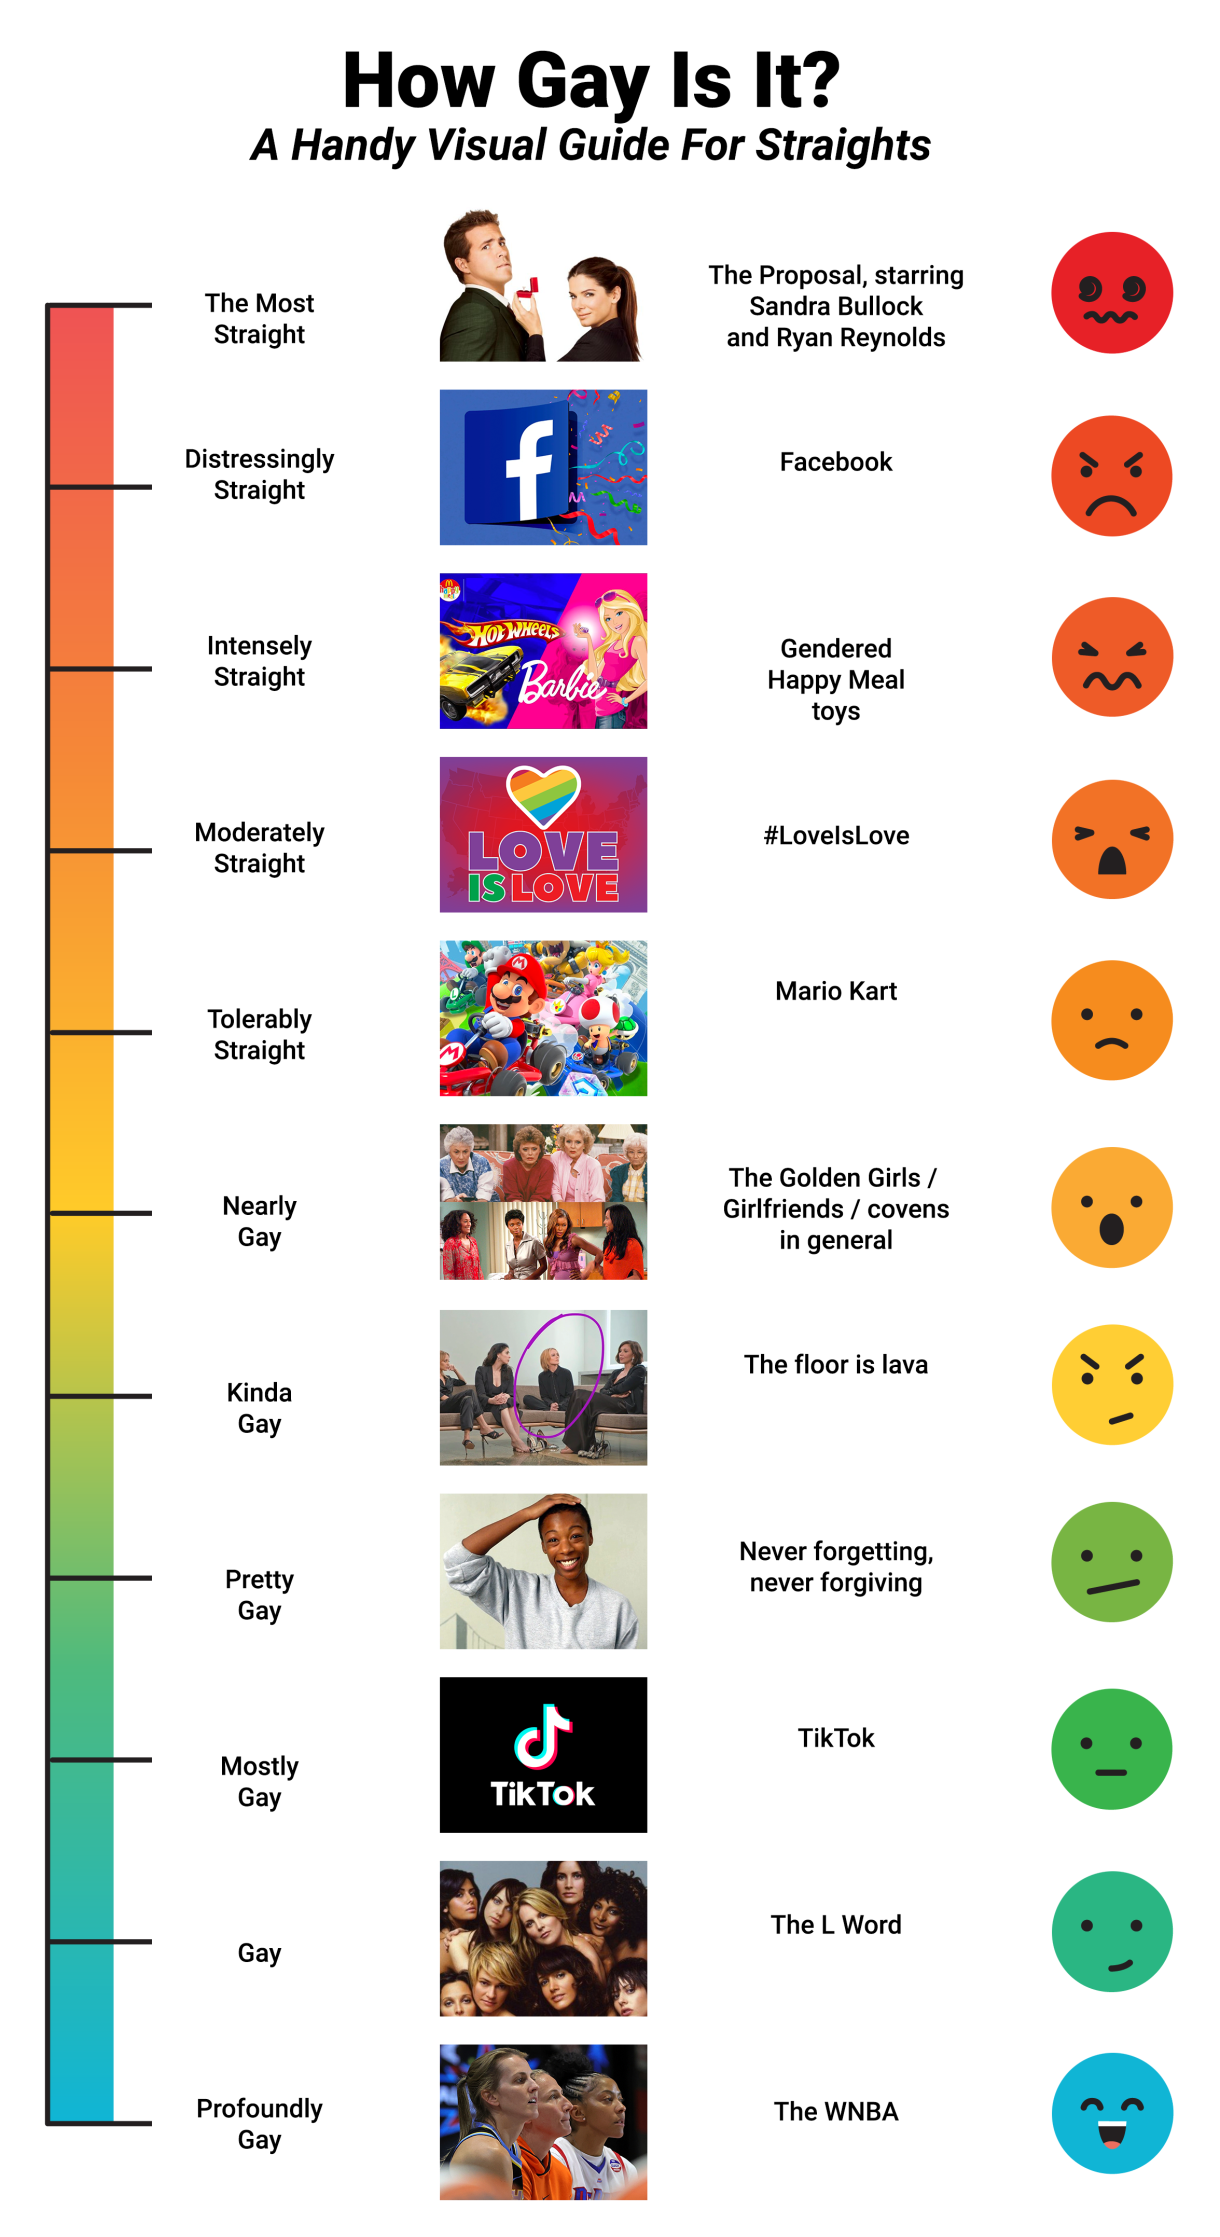 A chart with 11 frowny to smiley faces, indicating straightness to gayness. Text: The Most Straight (The Proposal), Distressingly Straight (Facebook), Intensely Straight (Gendered Happy Meal Toys), Moderately Straight (#LoveIsLove), Tolerably Straight (Mario Kart), Nearly Gay (The Golden Girls, Girlfriends, covens in general) Kinda Gay (The floor is lava), Pretty Gay (Never forgiving, never forgetting) Mostly Gay (TikTok), Gay (The L Word), Profoundly Gay (The WNBA)